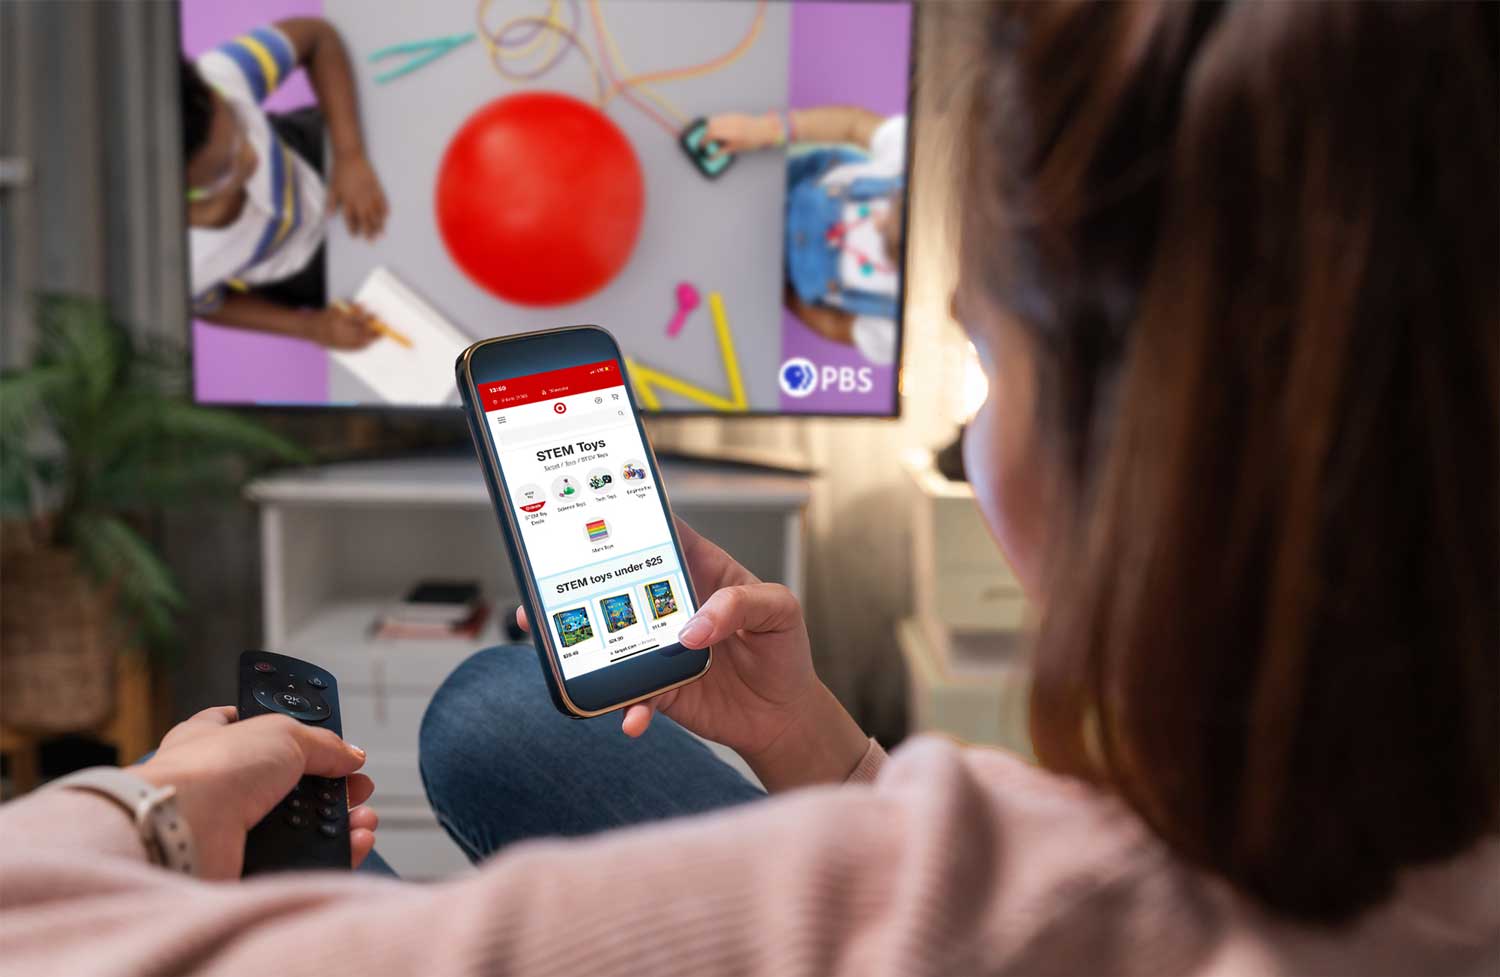 A person is sitting on a couch, holding a smartphone and a TV remote. The smartphone displays a STEM Toys webpage while the TV in the background shows a PBS program featuring children working on a craft project.